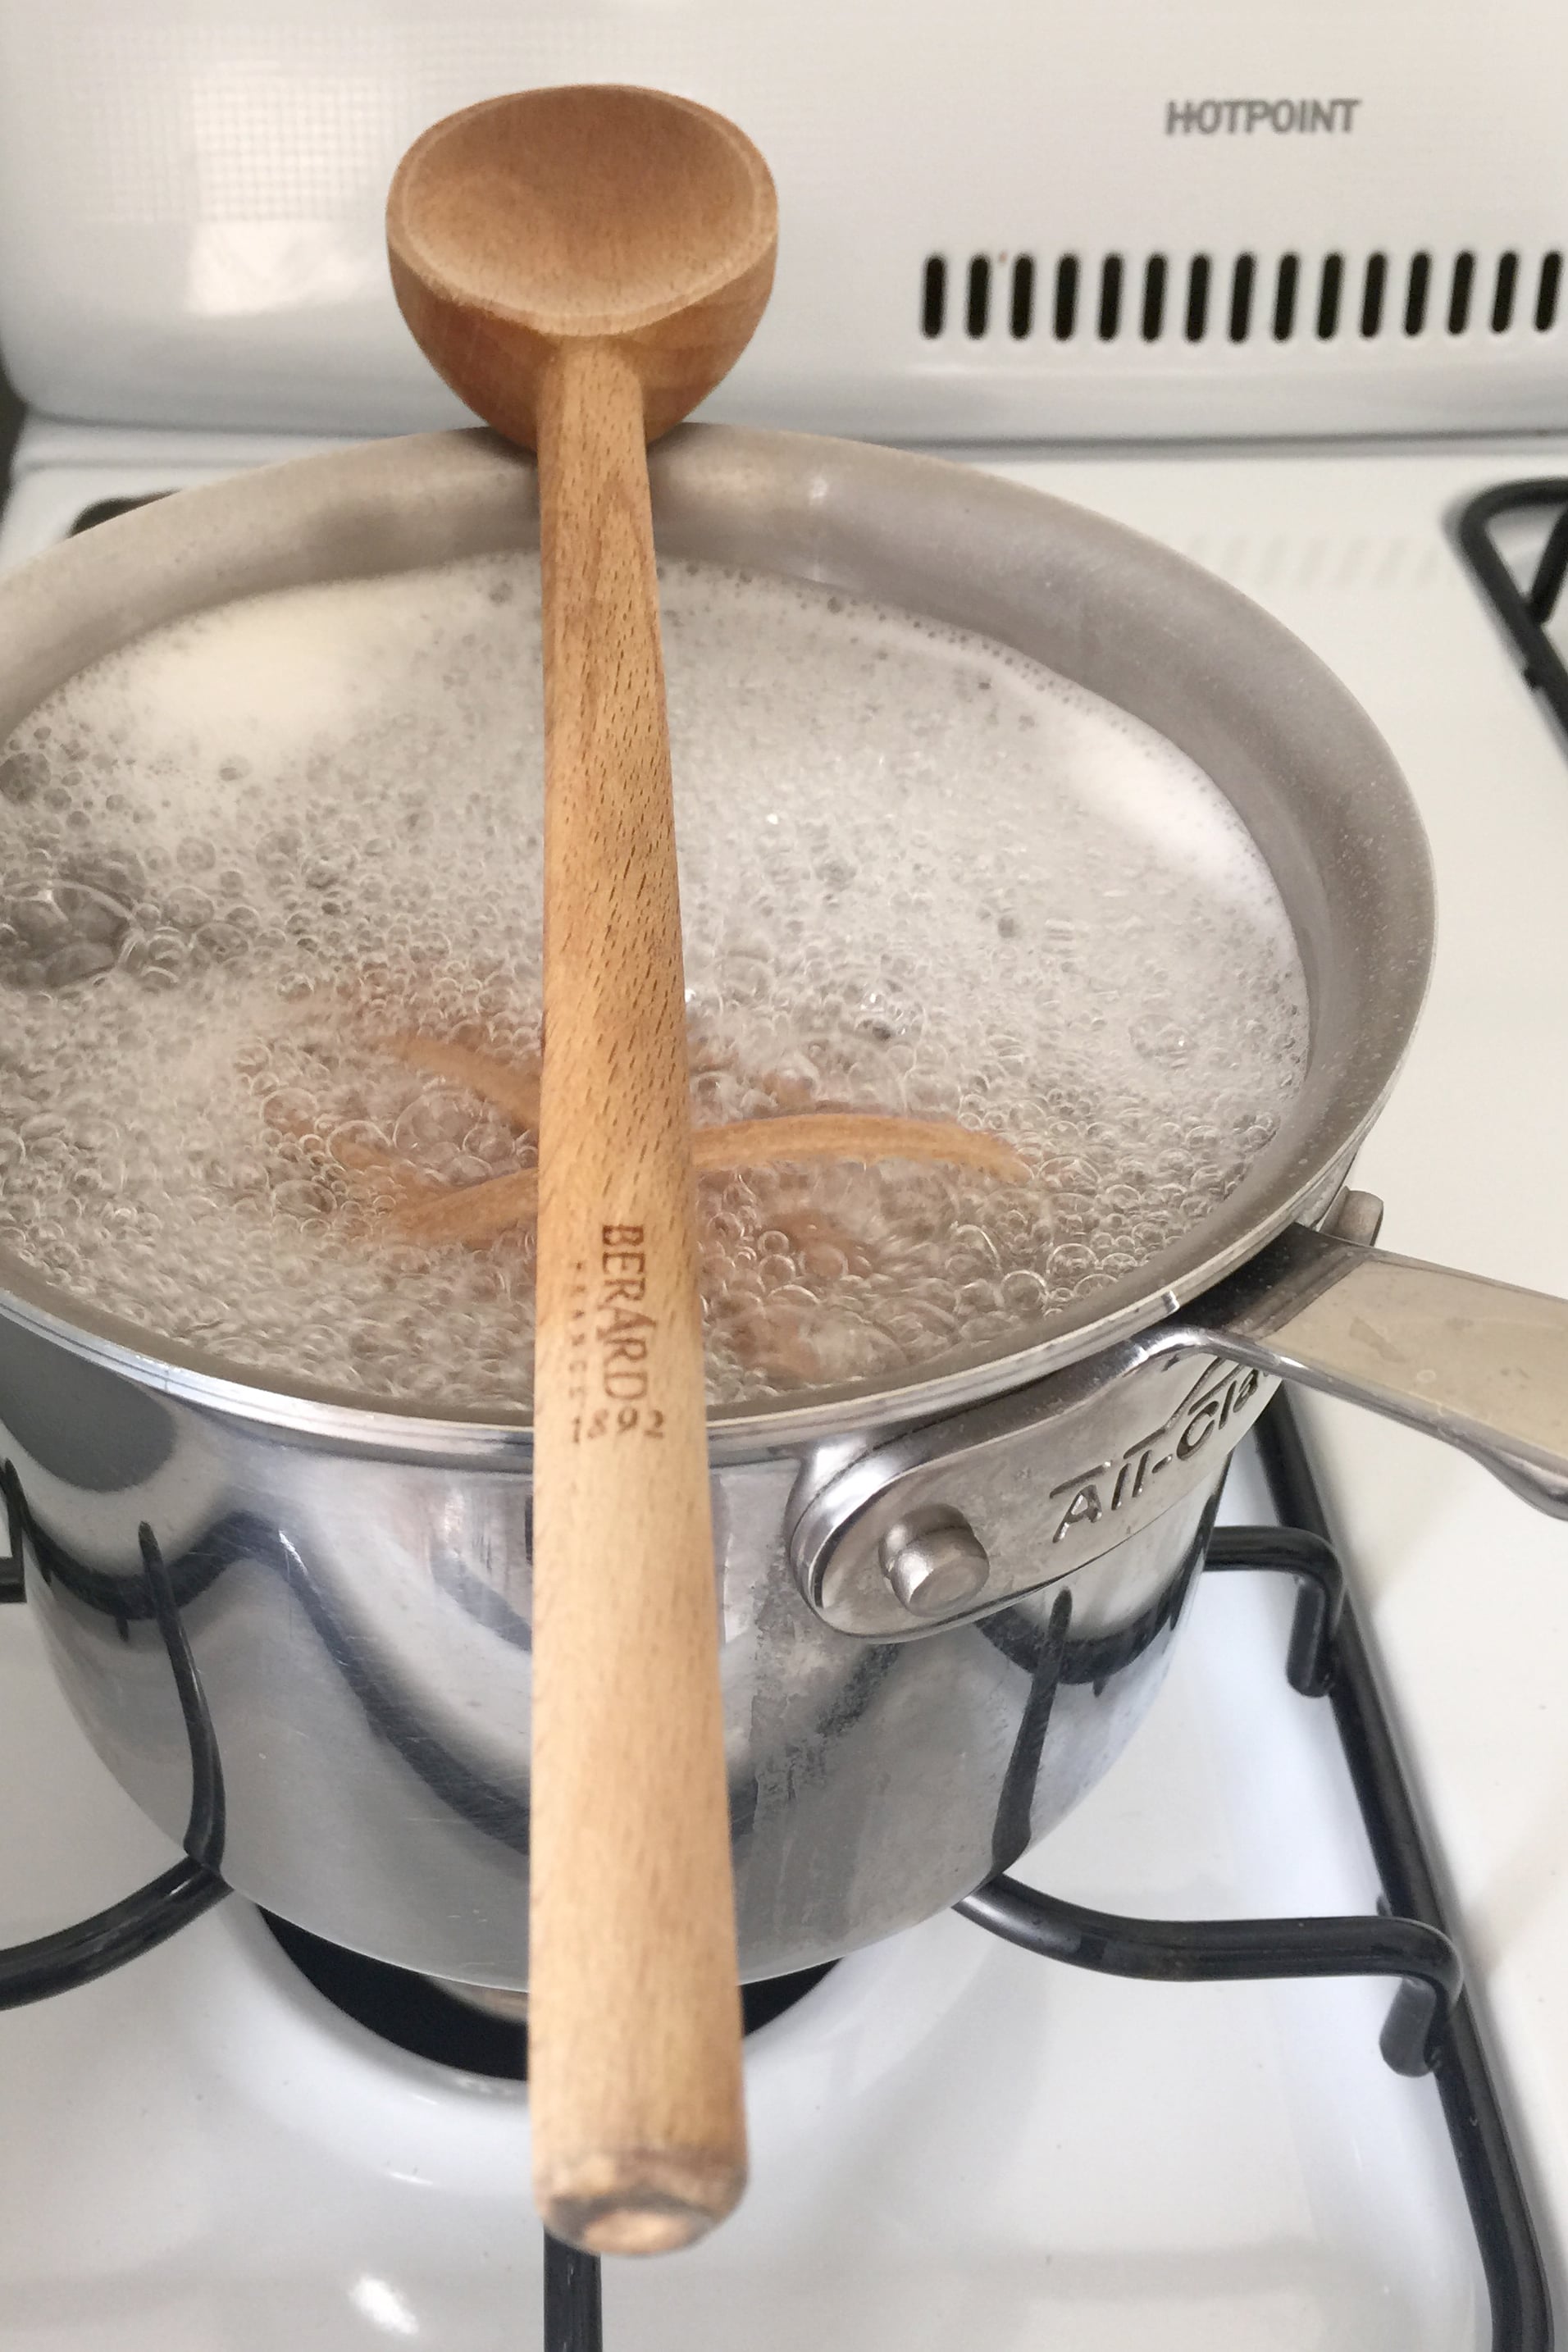 Why Does a Wooden Spoon Stop Water From Boiling Over?